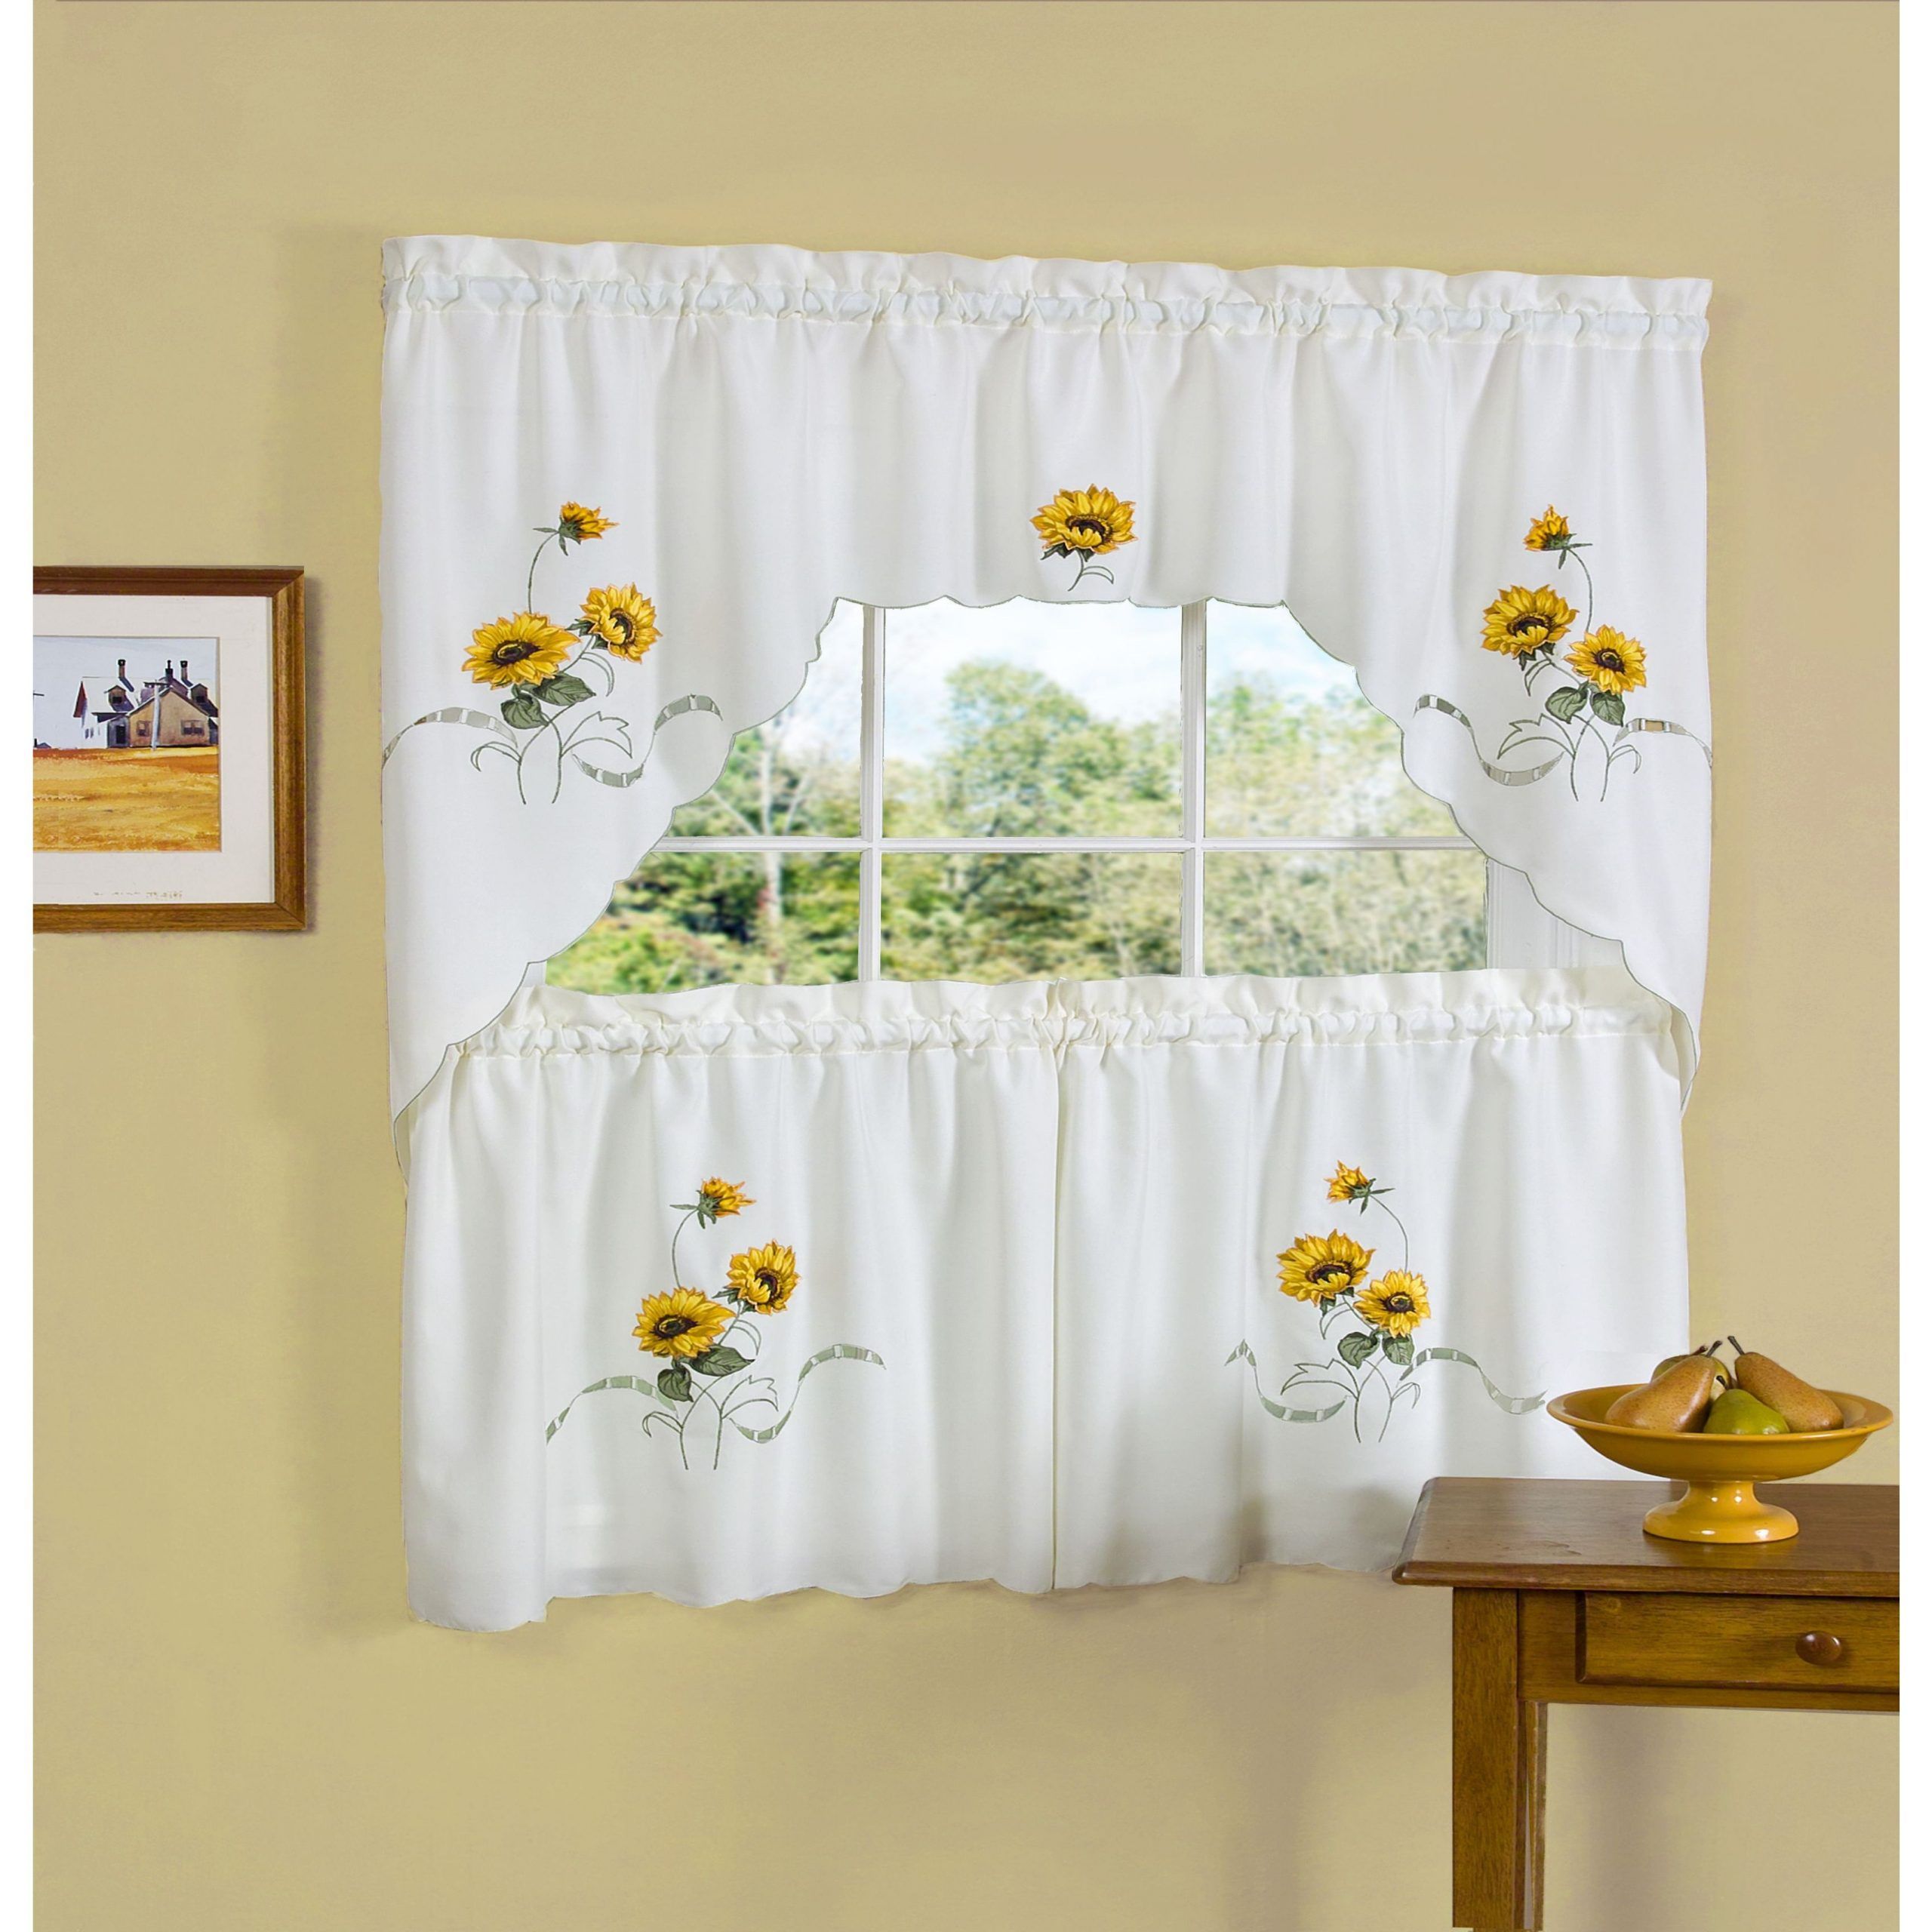 Achim Home Furnishings Lemon Drop Tier And Valance Window For Lemon Drop Tier And Valance Window Curtain Sets (View 2 of 20)